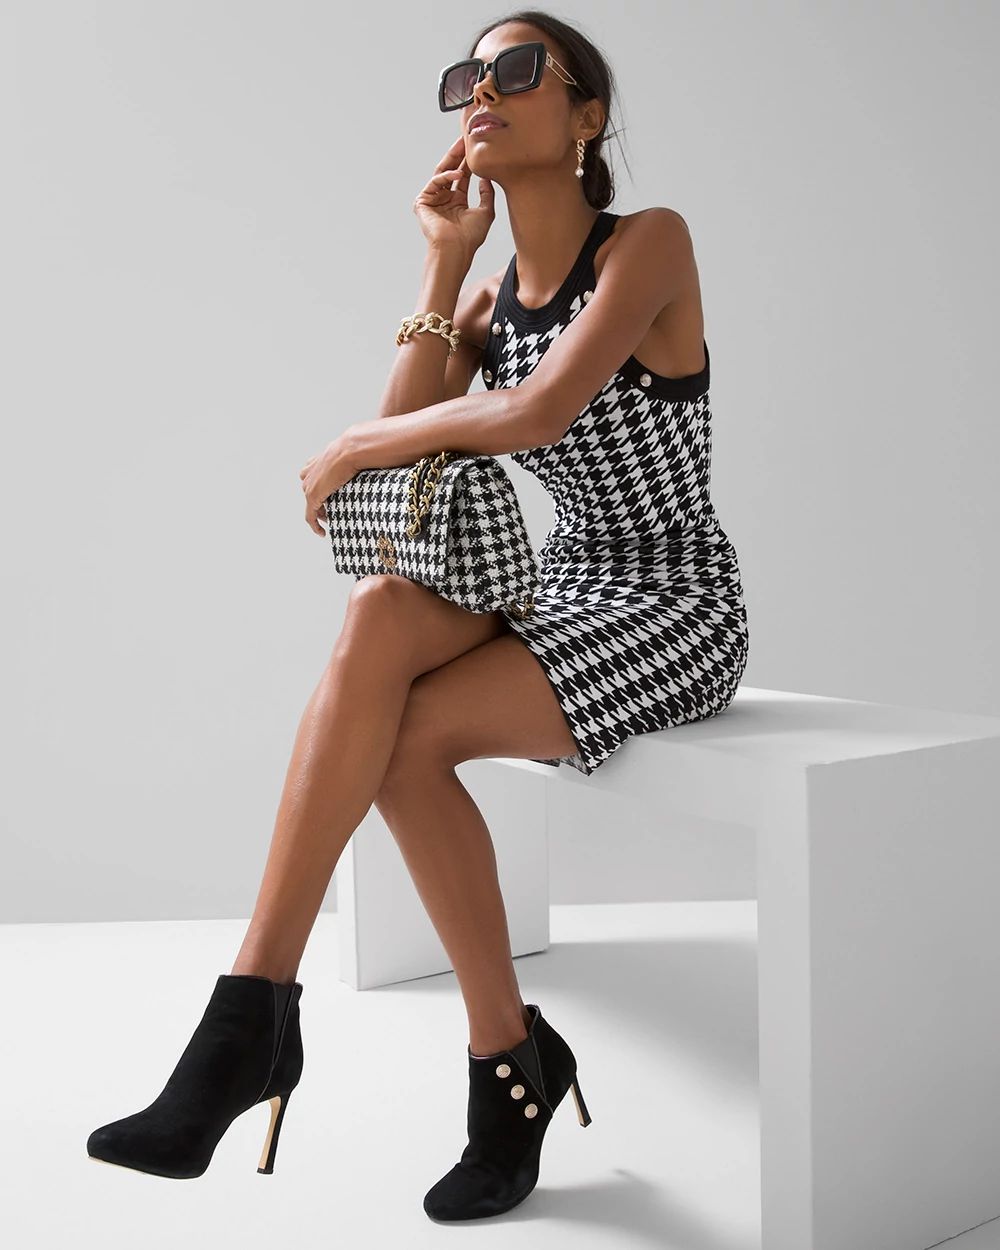 Houndstooth Halter Sweater Dress click to view larger image.